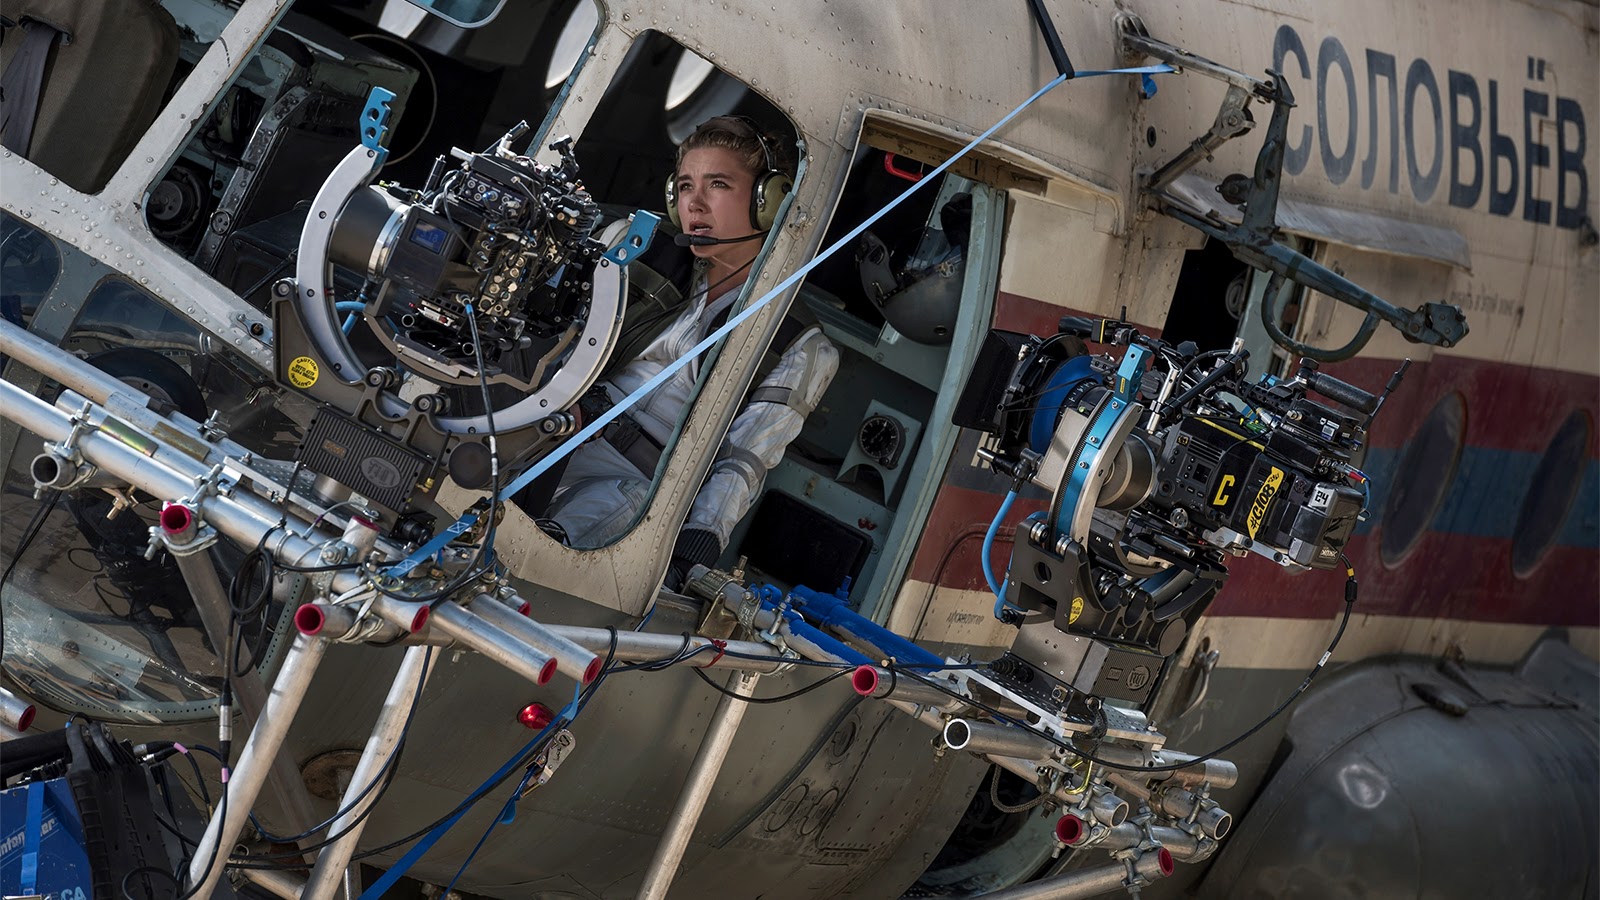 Florence Pugh in the cargo plane rig